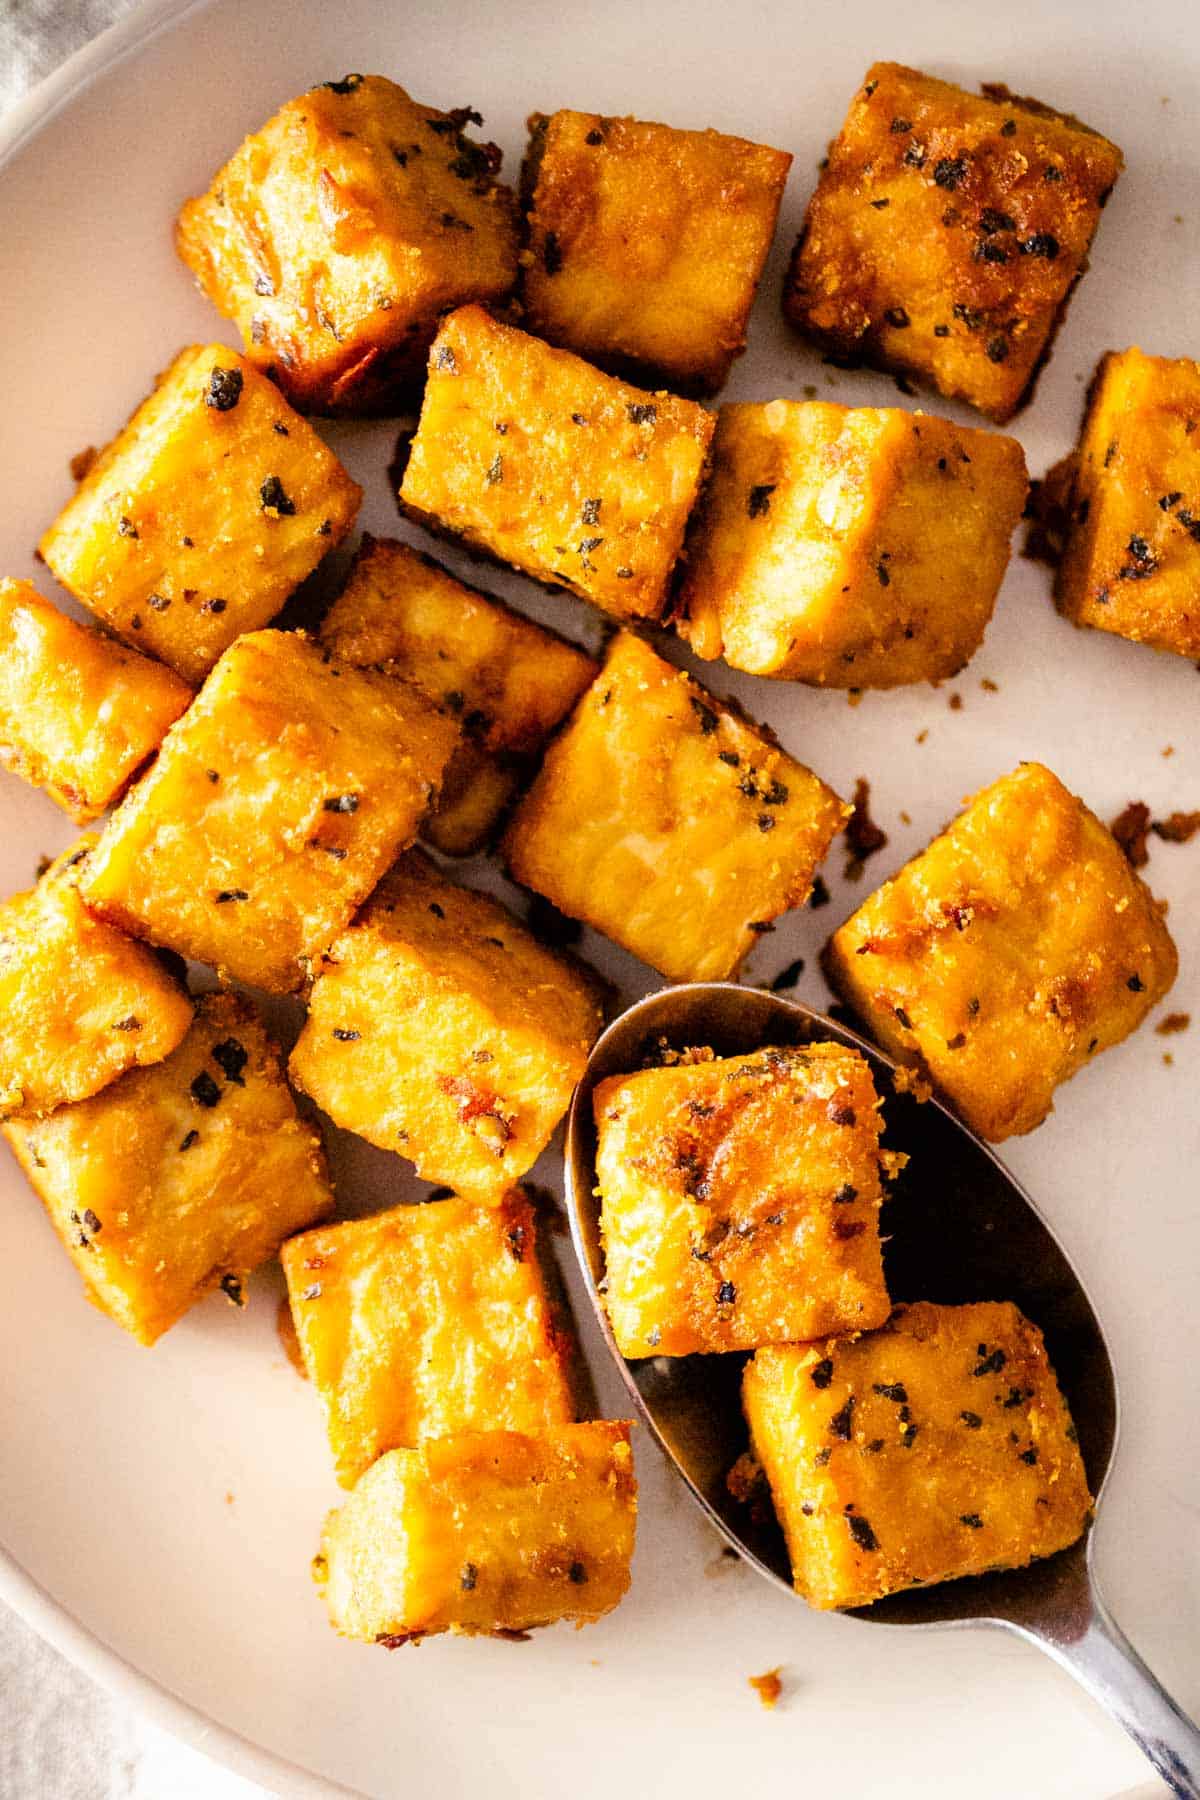 Marinated baked tempeh cubes on a plate.